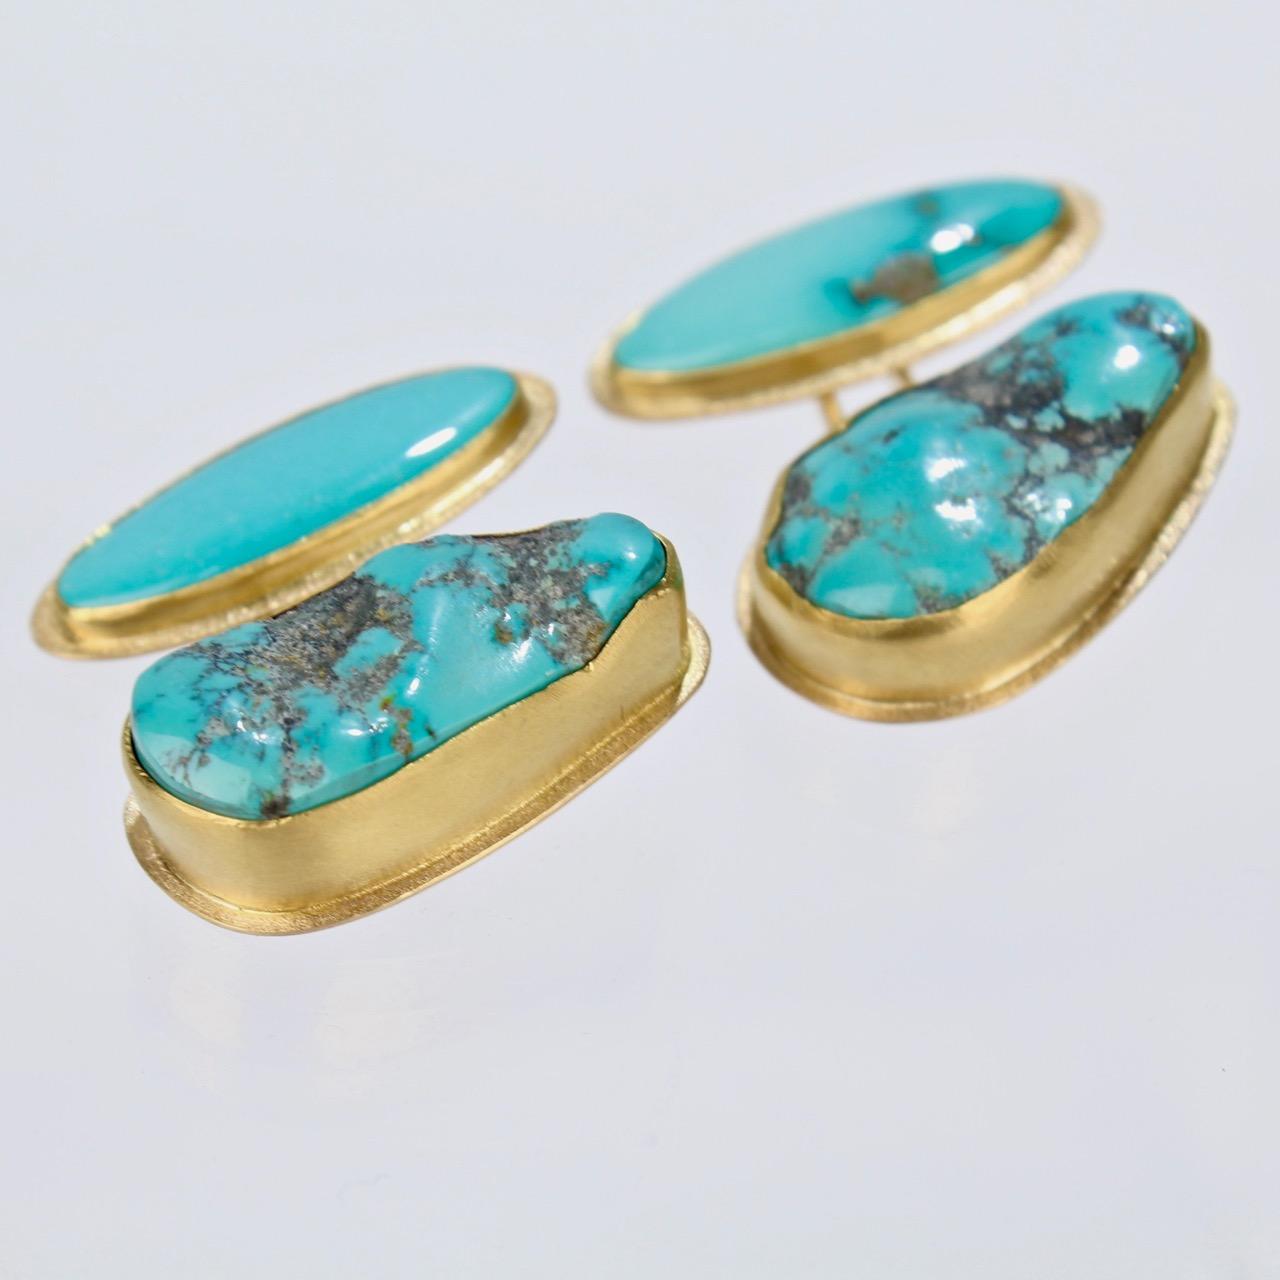 A very fine set of bezel set turquoise and gold cufflinks by Isabelle Posillico. 

These wonderful turquoise stones are set in a combination of 14k, 18K, and 22K gold and present as a truly striking pair of cufflinks.  

Posillico is highly regarded